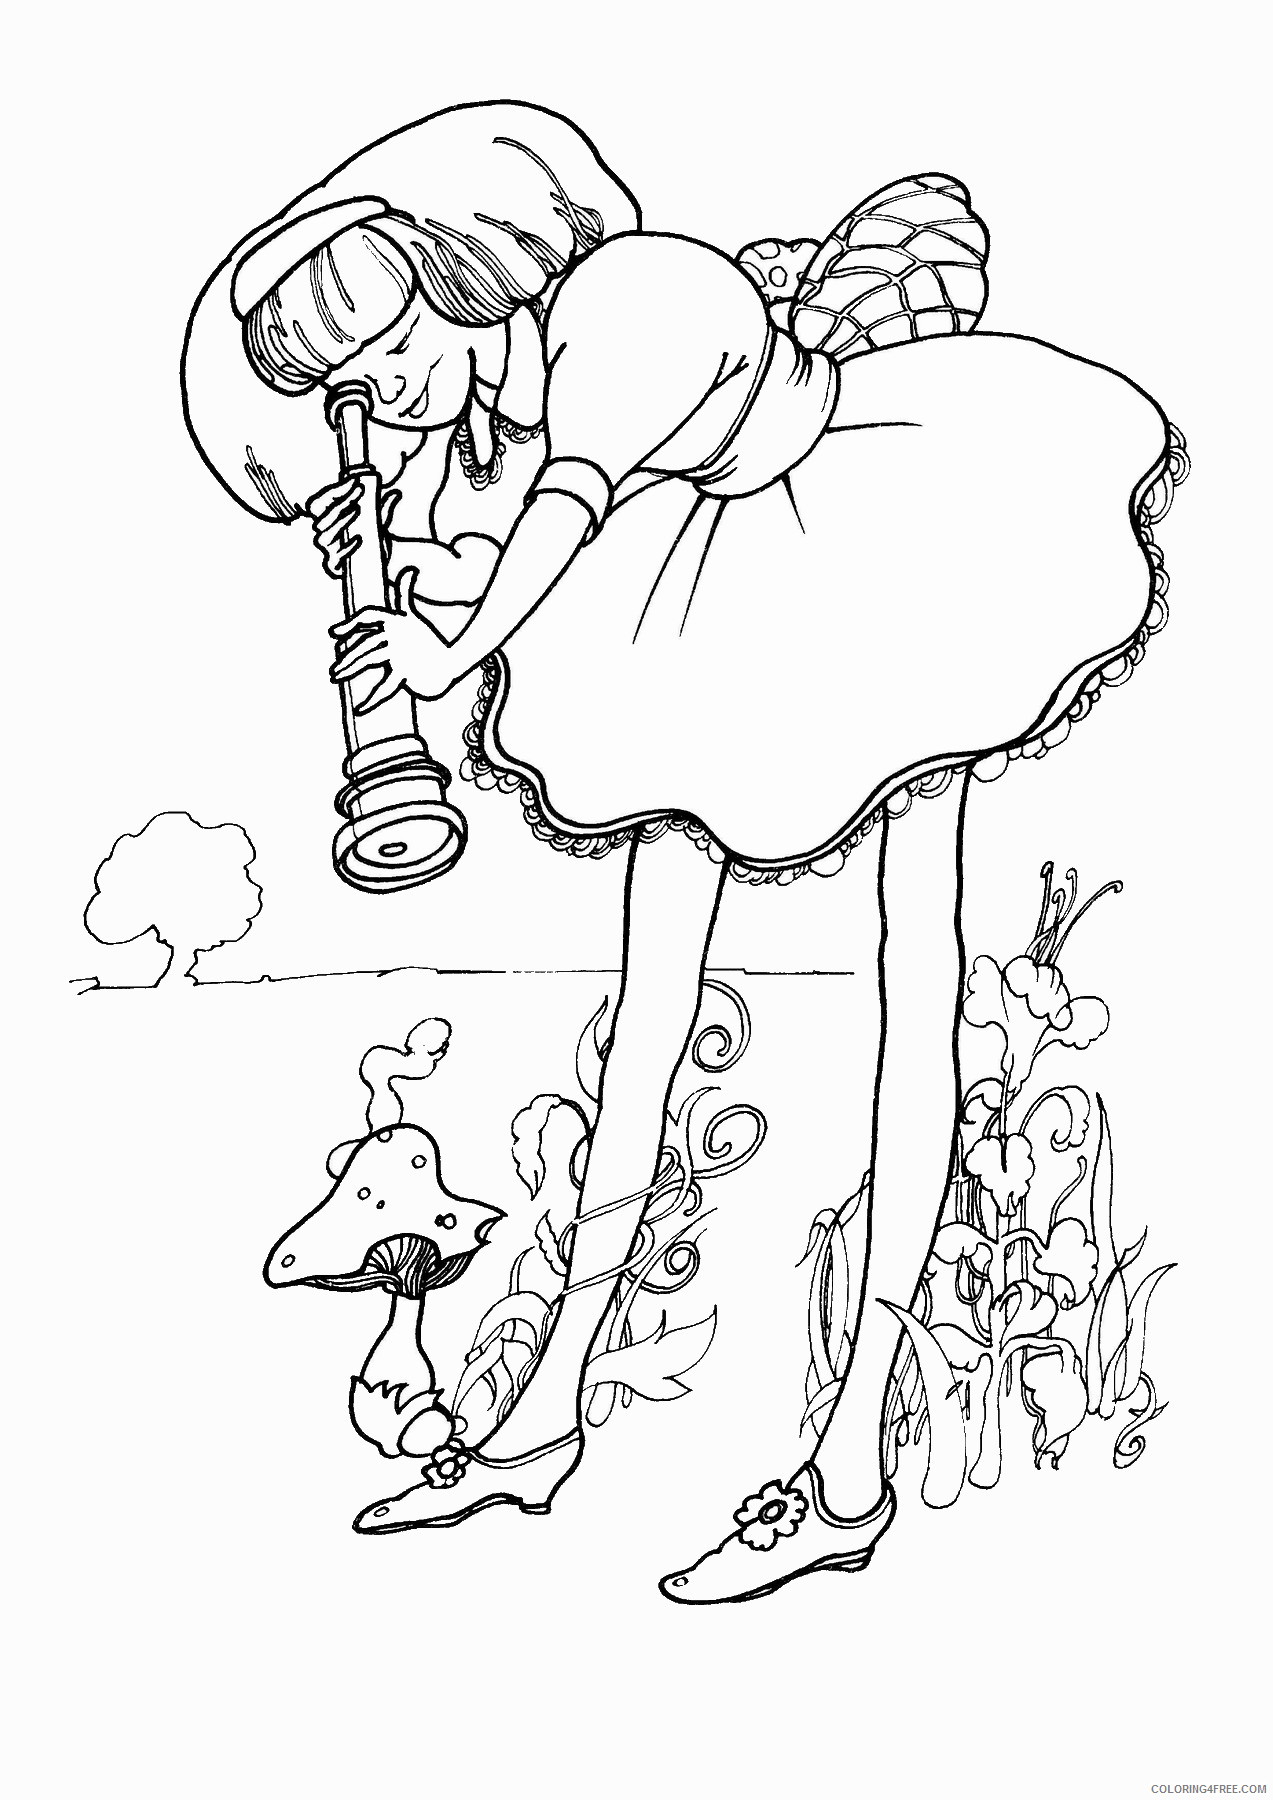 Alice in Wonderland Coloring Pages Cartoons alice_69 Printable 2020 0363 Coloring4free